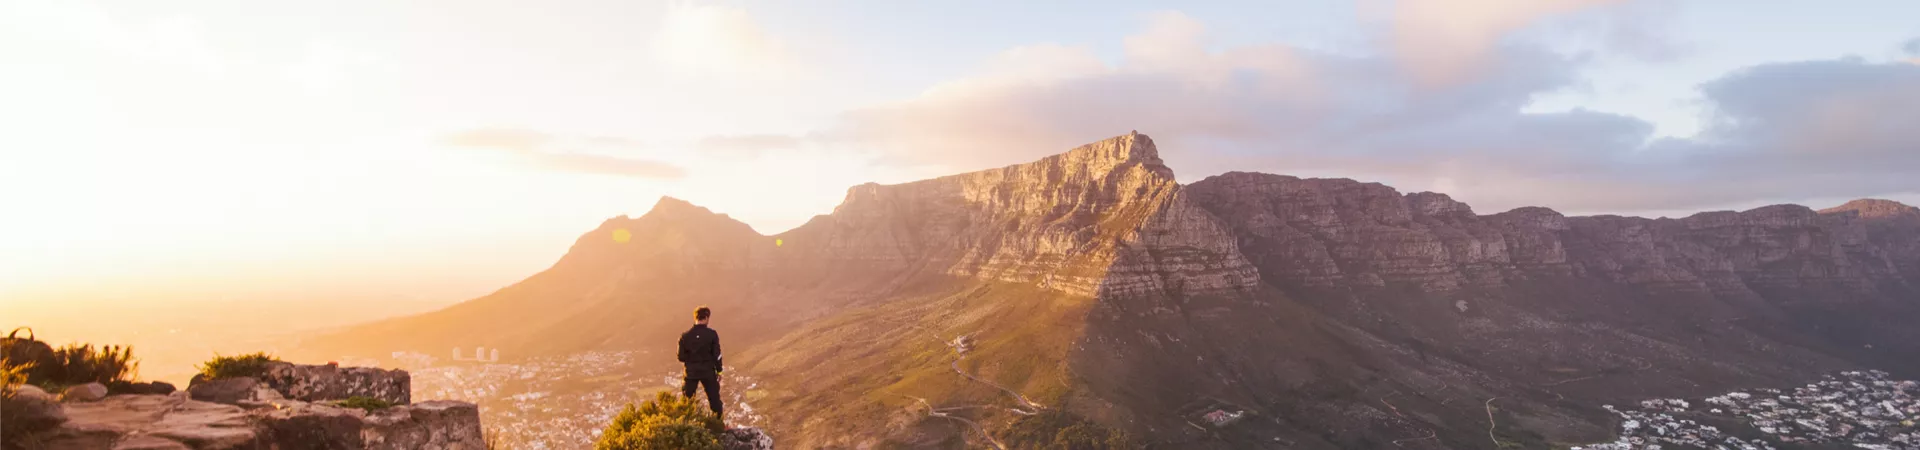 Mountain tops of Table Mountains, Cape Town, South Africa